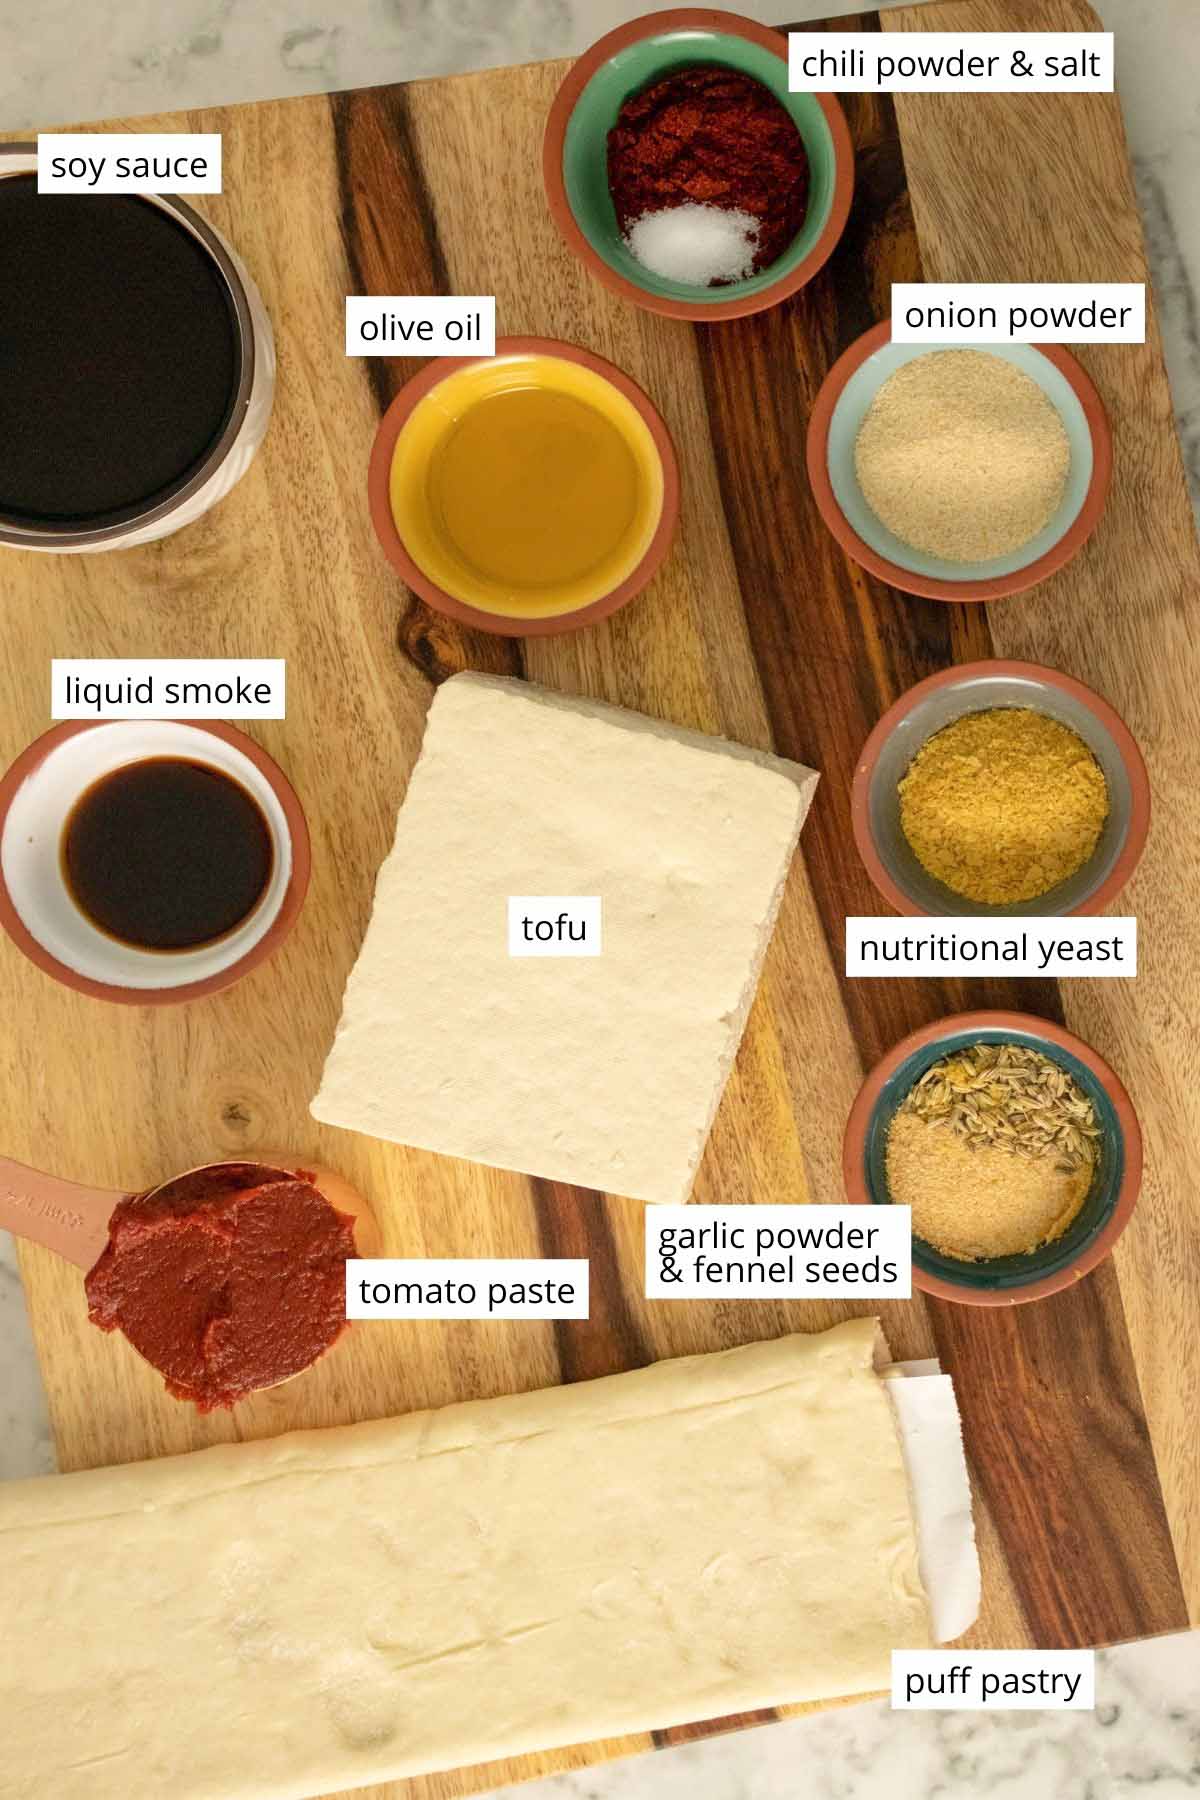 tofu, puff pastry, and lots of seasonings in bowls on a wooden cutting board